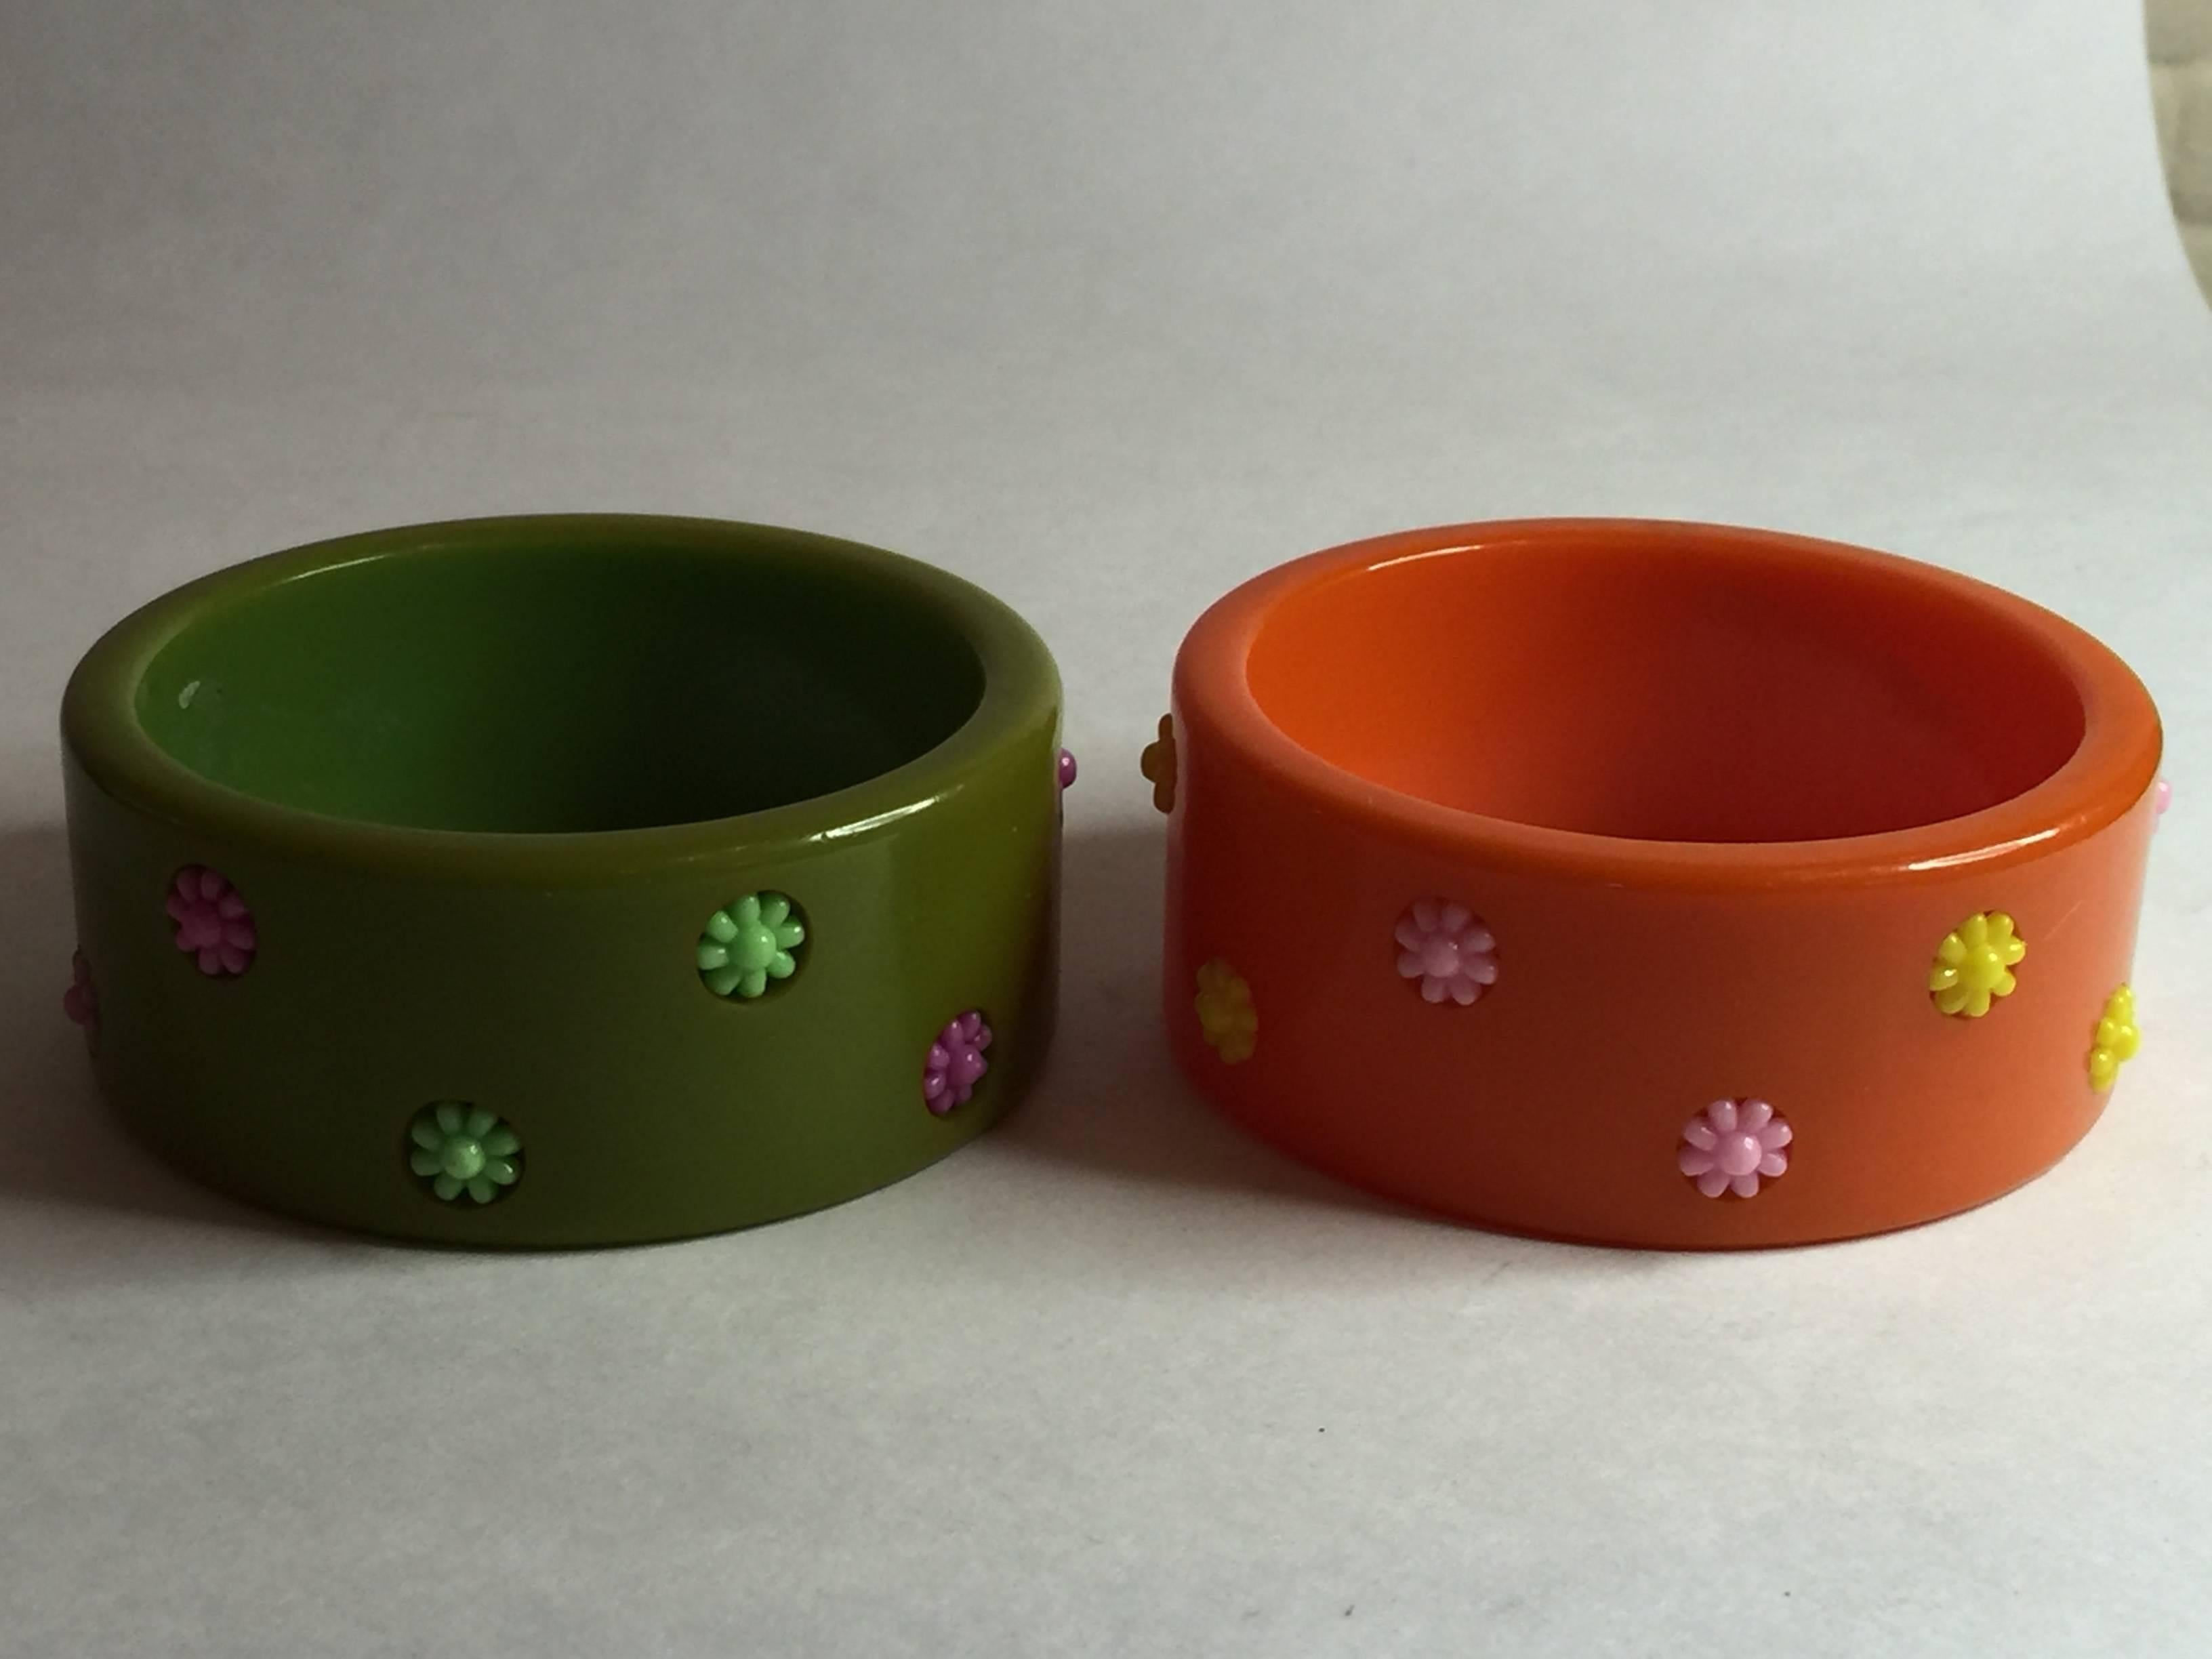 1940s Art Deco  Geometric Dotted Inlaid  Bakelite bangle  Pair (2)  Orange/Green In Excellent Condition For Sale In Palm Springs, CA